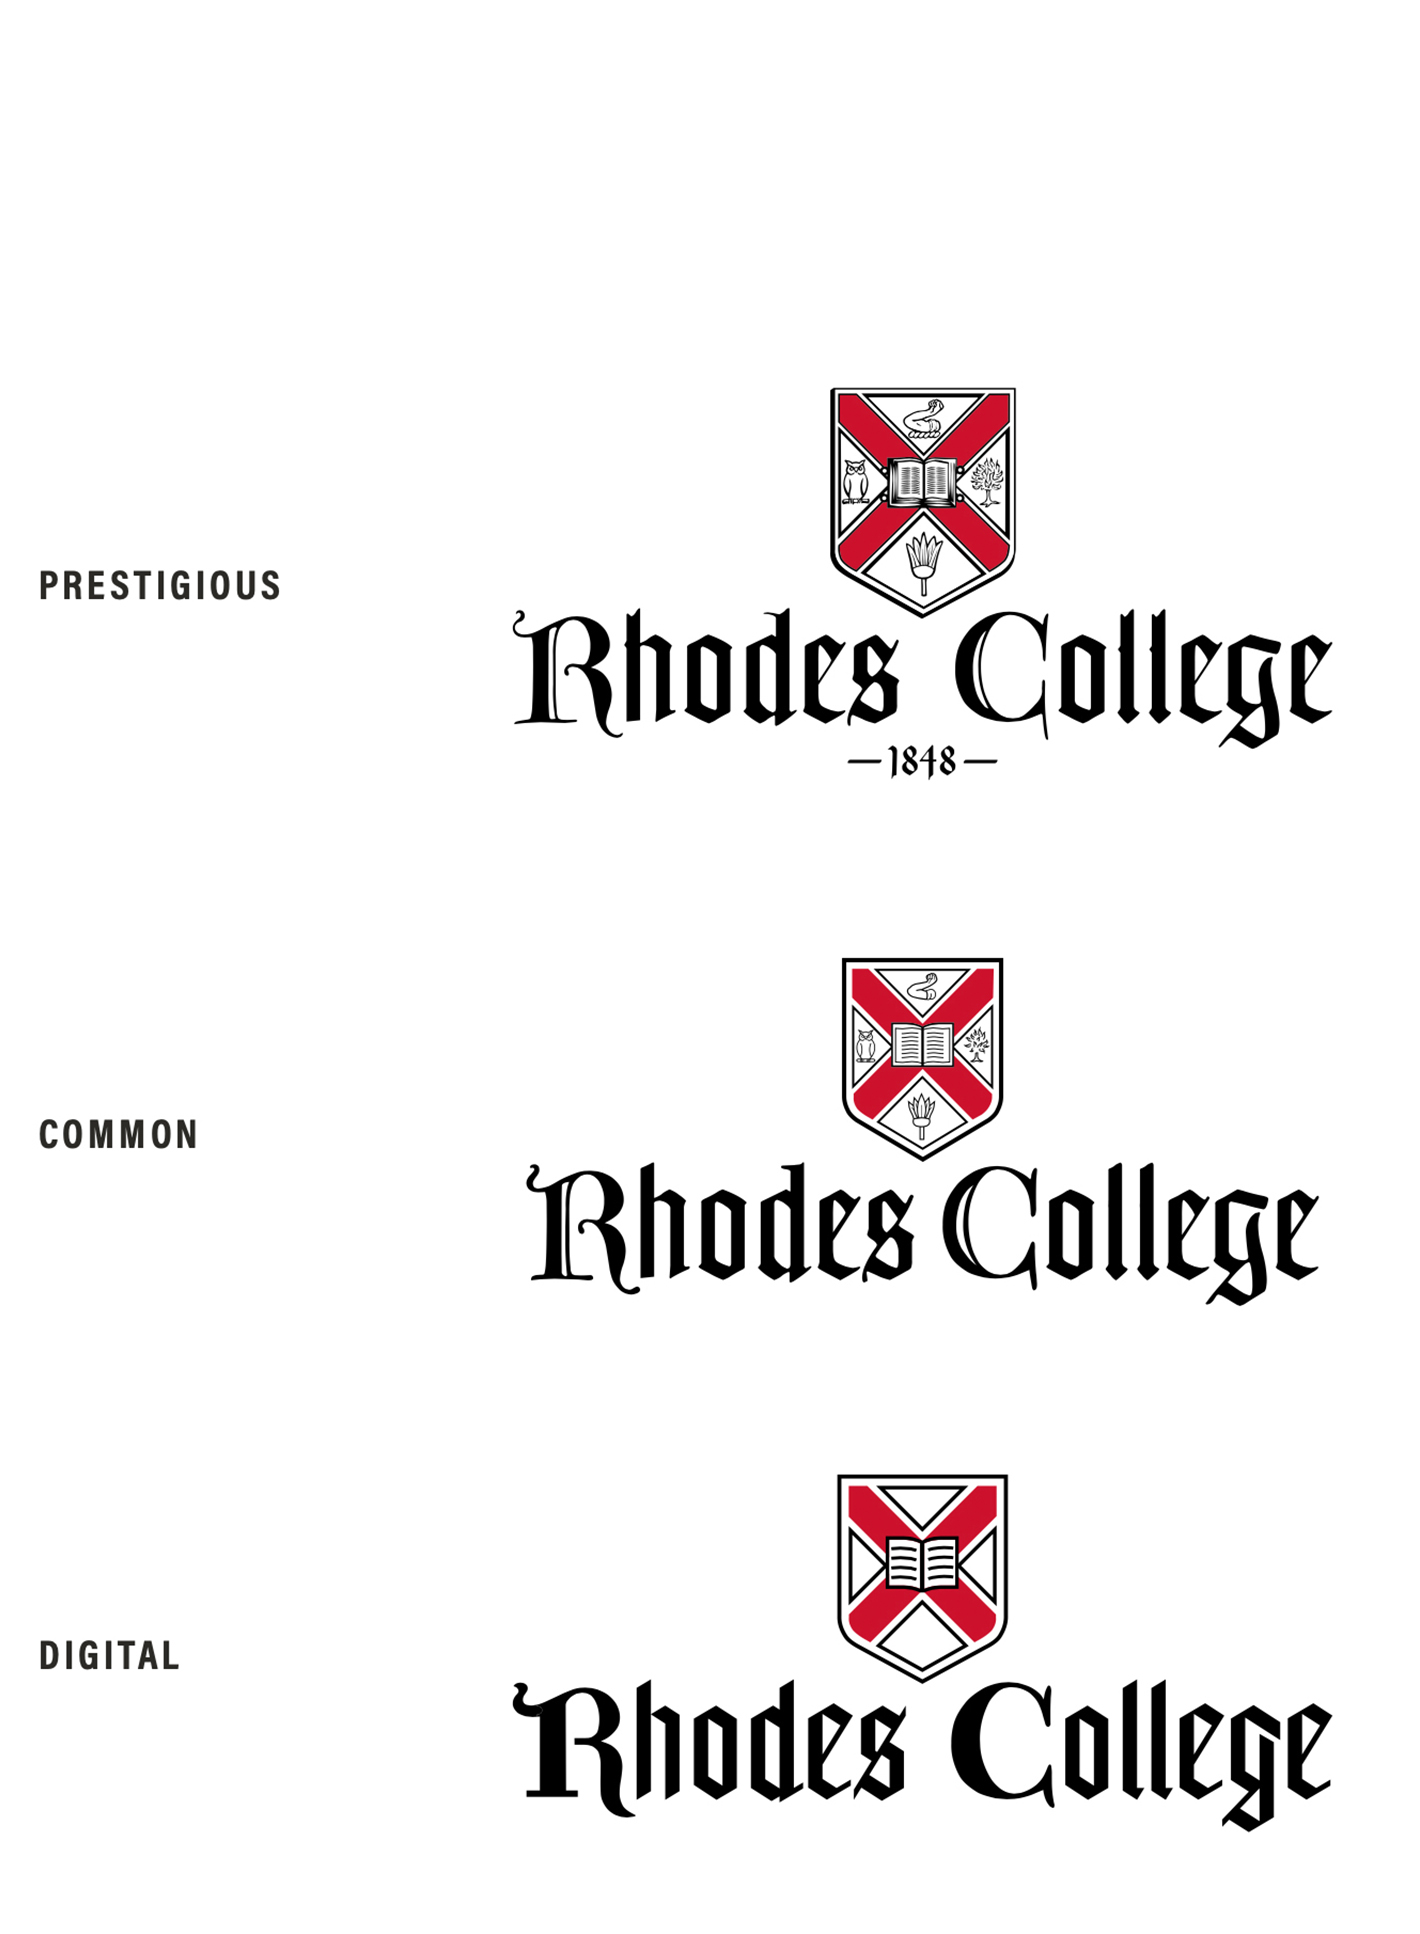 representations of the Rhodes College logos